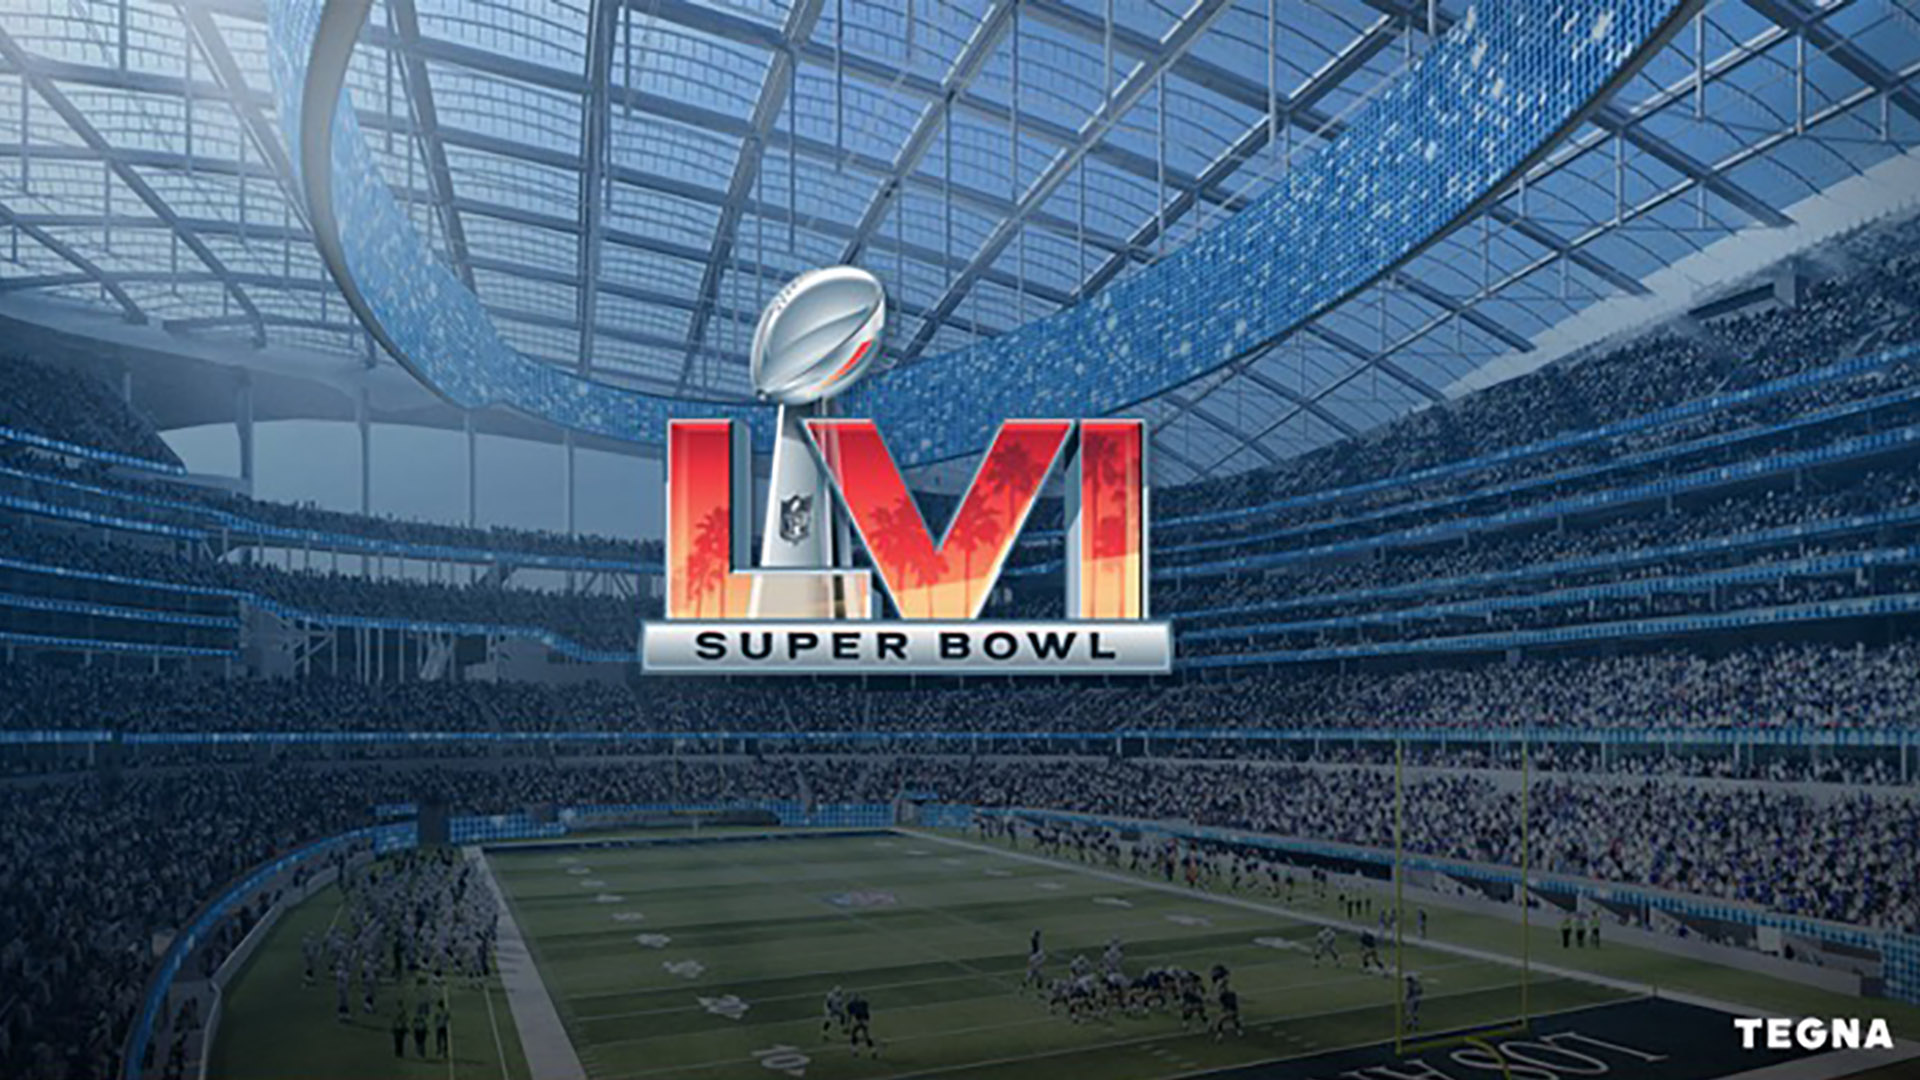 who is streaming the super bowl 2022